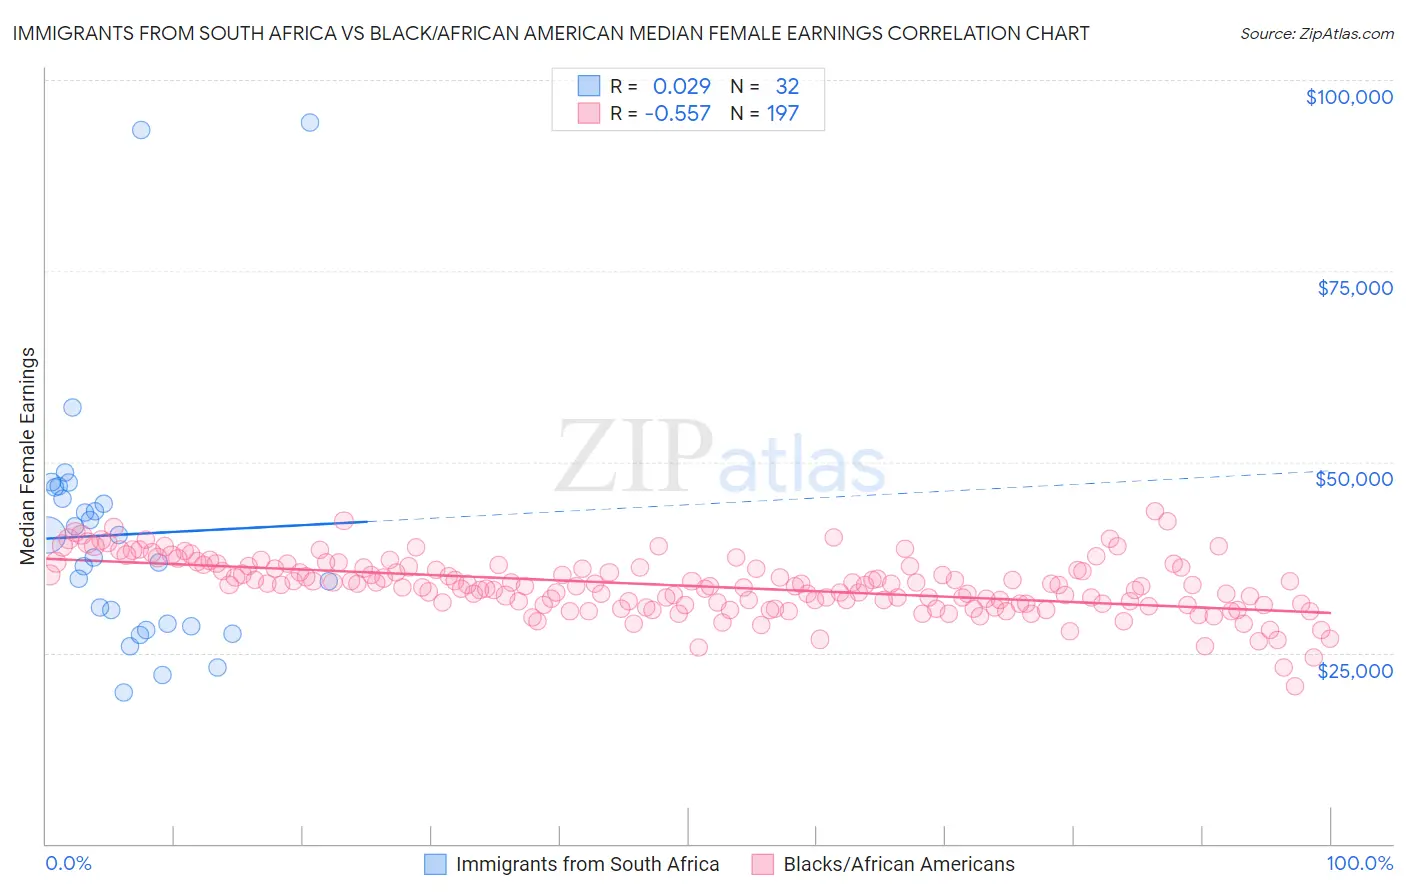 Immigrants from South Africa vs Black/African American Median Female Earnings